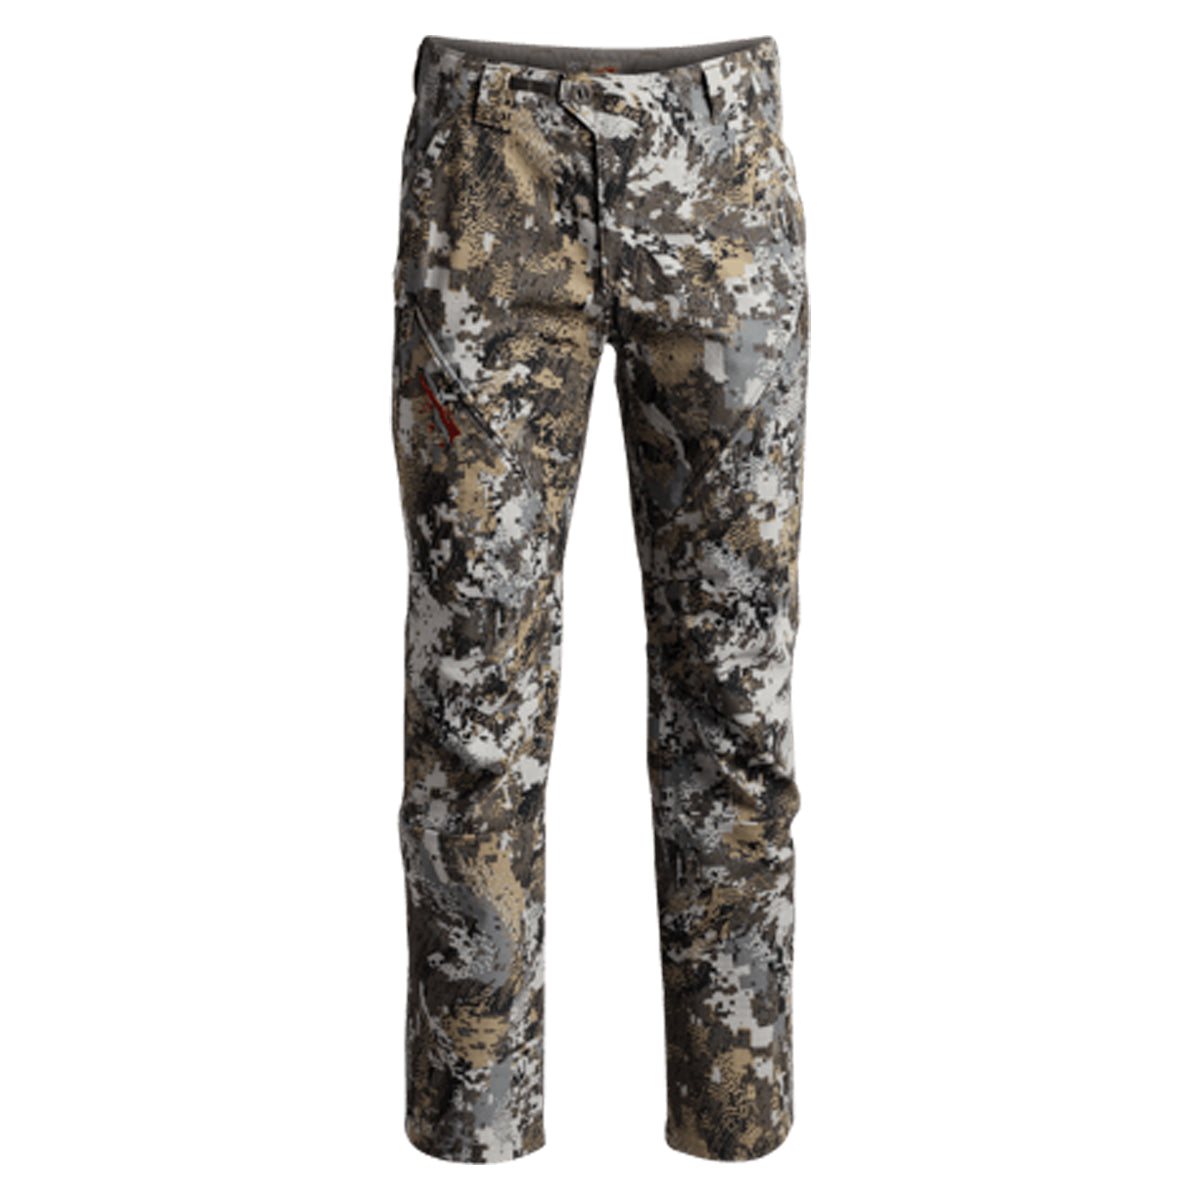 Sitka Equinox Guard Pant in Elevated II by GOHUNT | Sitka - GOHUNT Shop